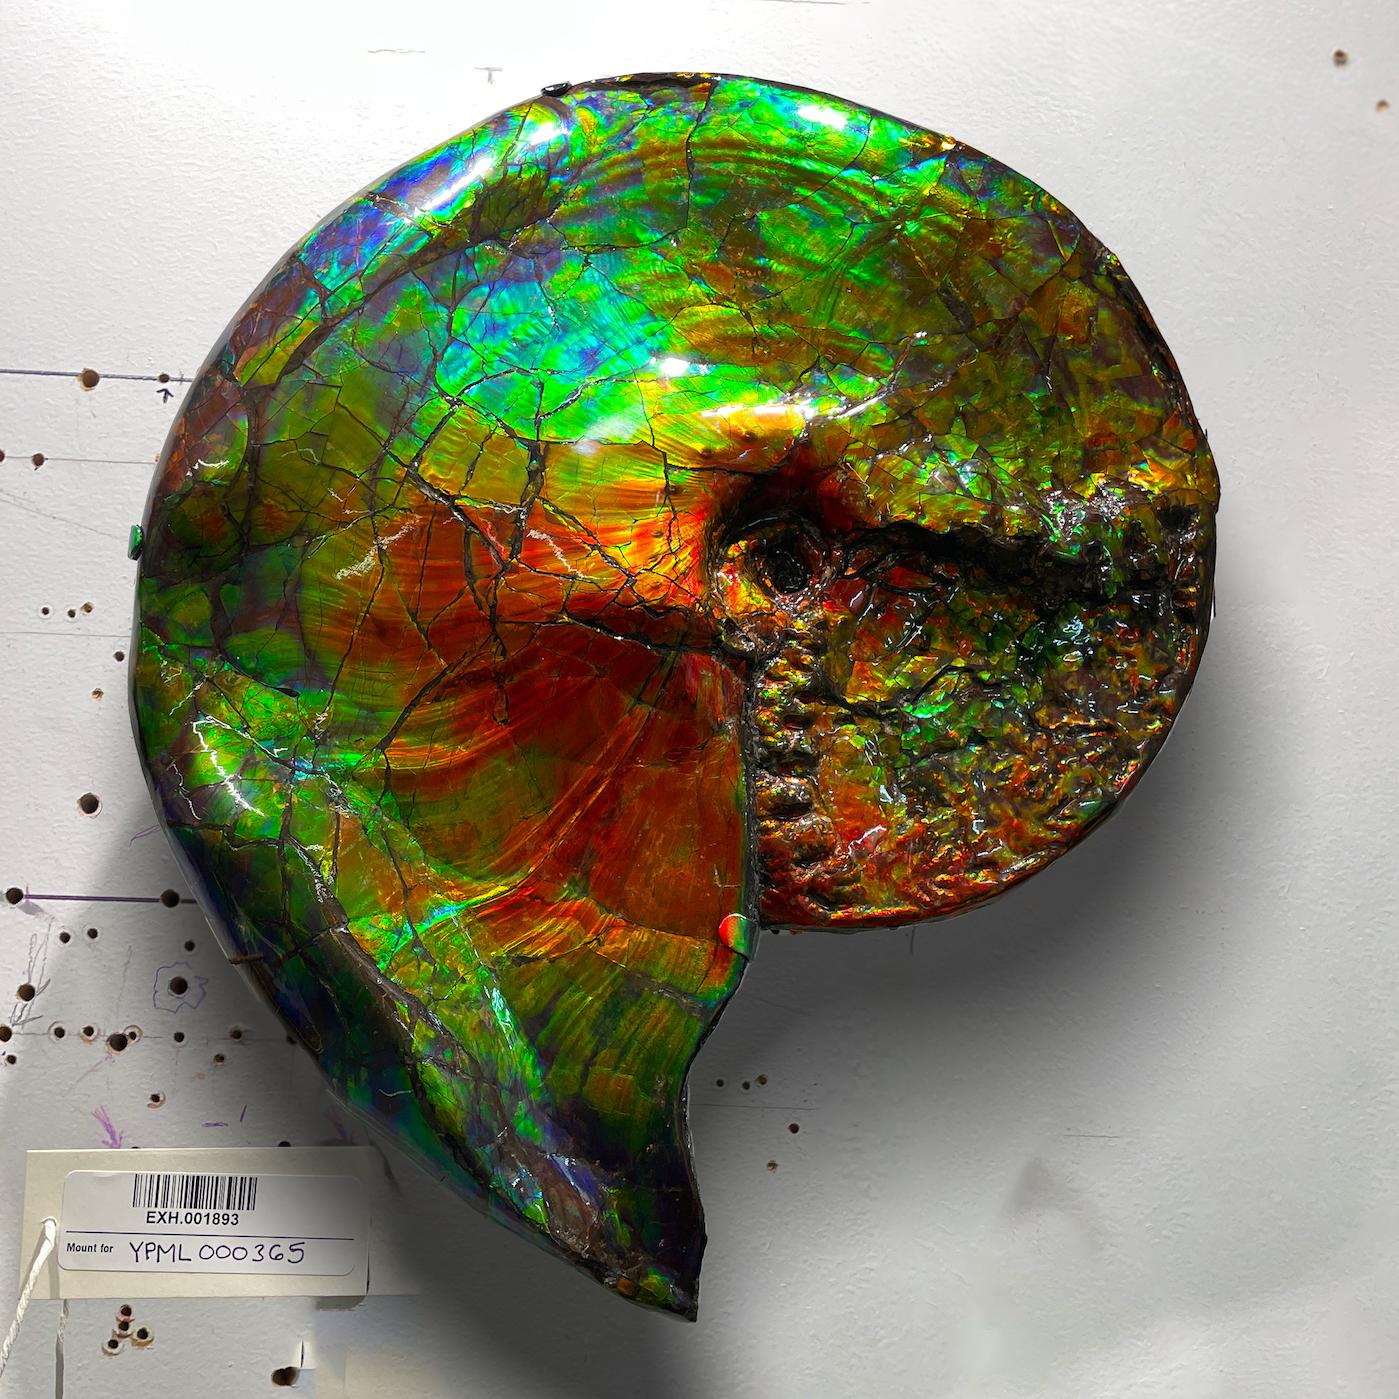 Large spiral rainbow iridescent shell mounted on a wall